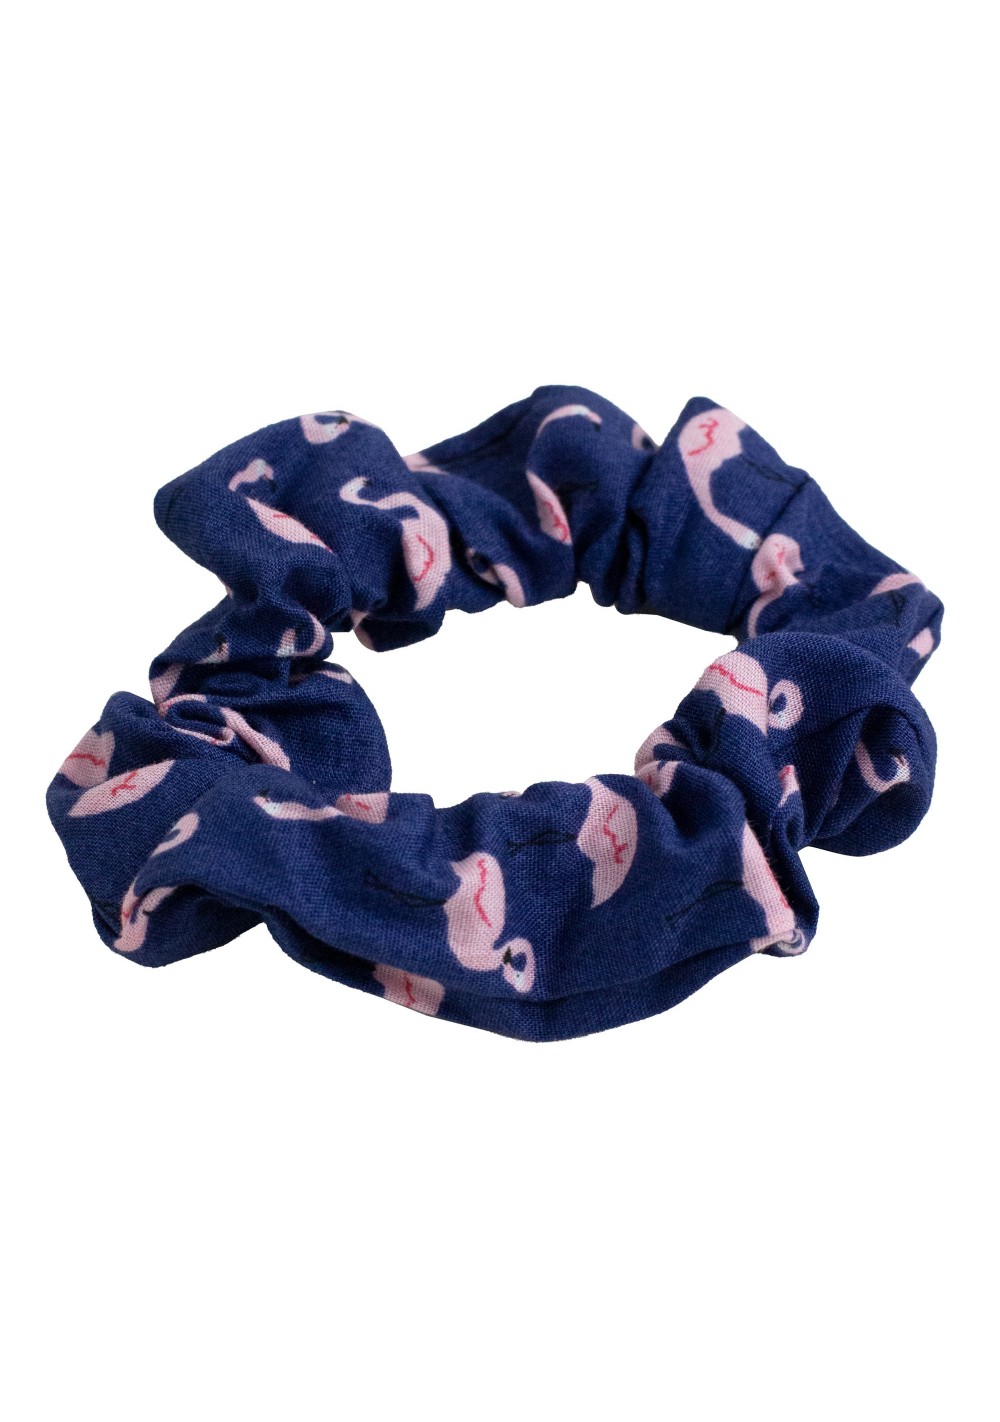 flamingo print scrunchie in navy and pink